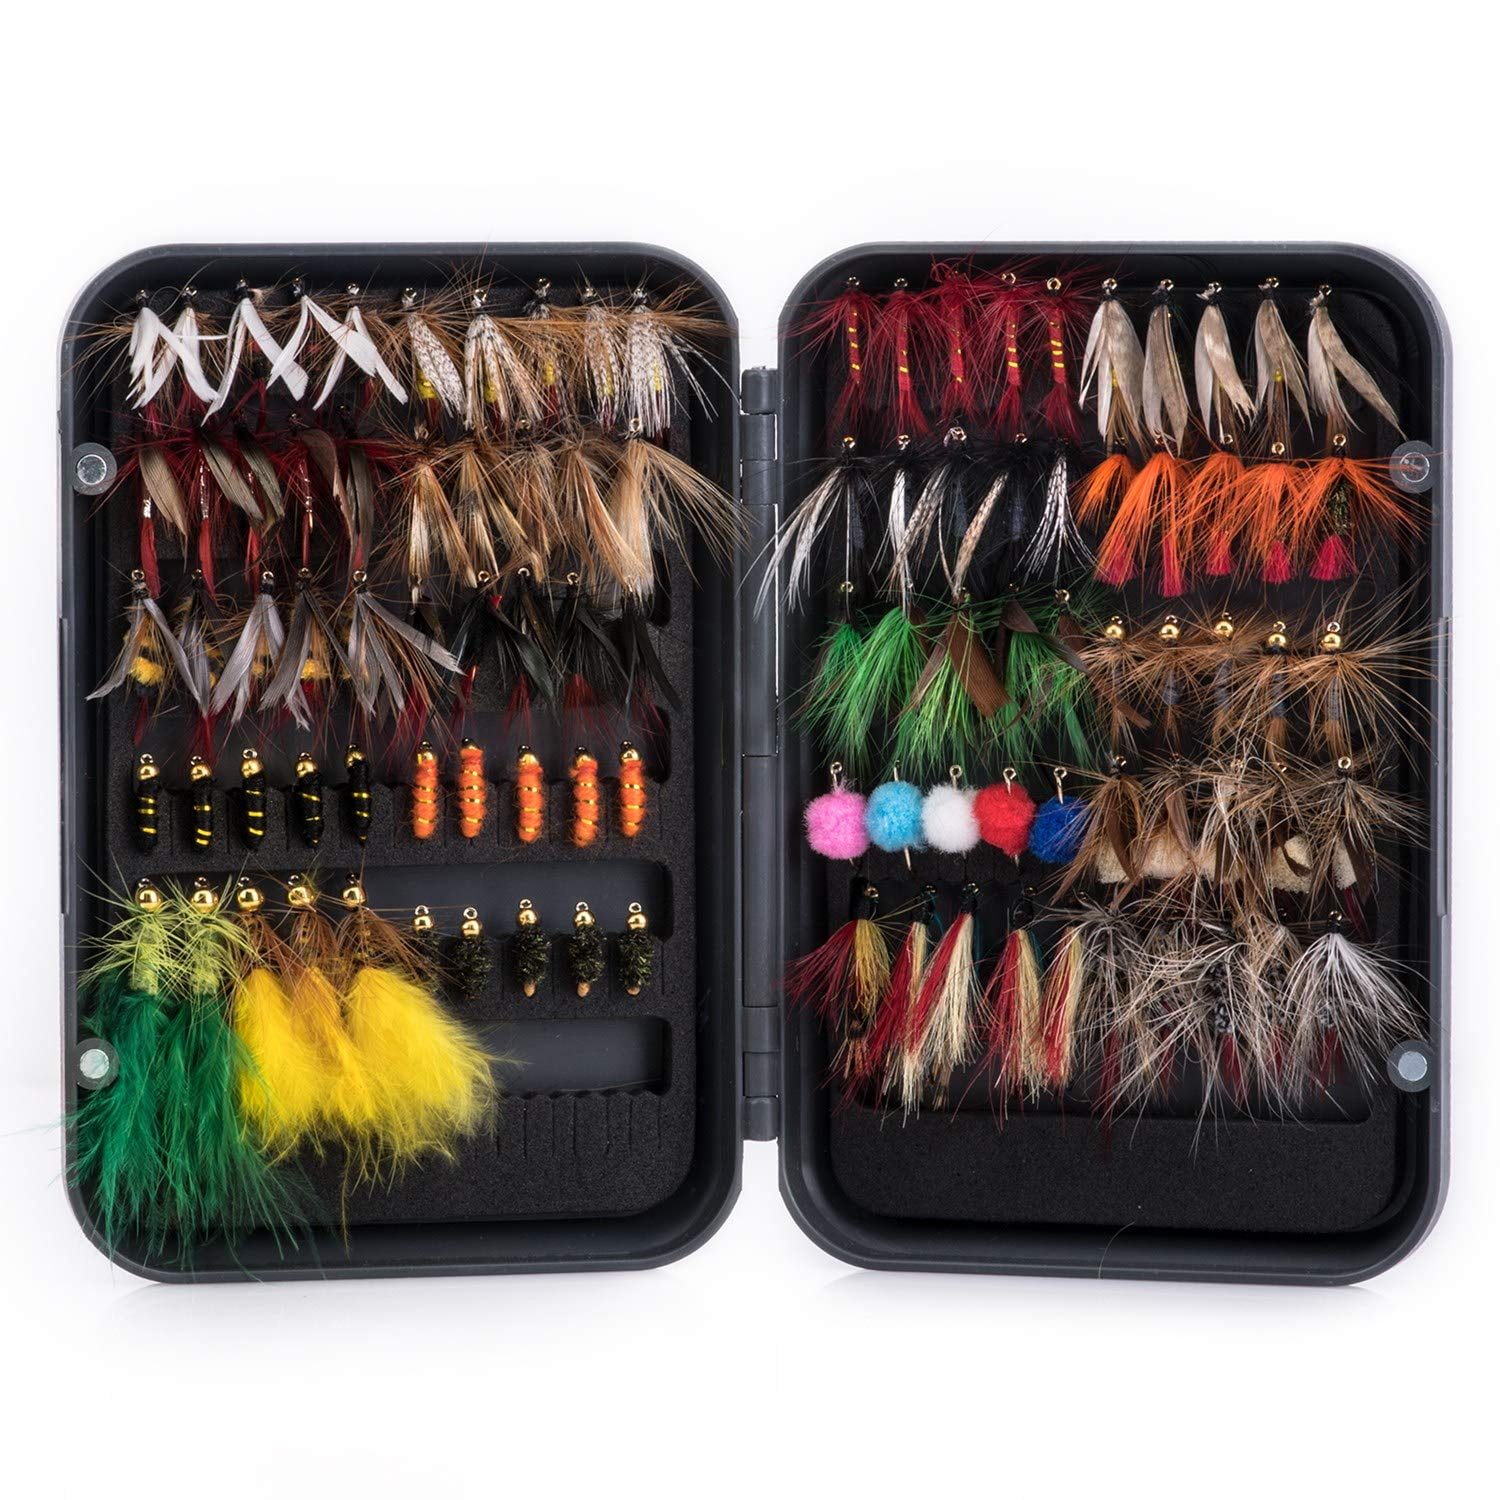 168Pcs wet dry fly fishing set nymph streamer poper emerger flies tying kit  material lures fishing box tackle for carp trout